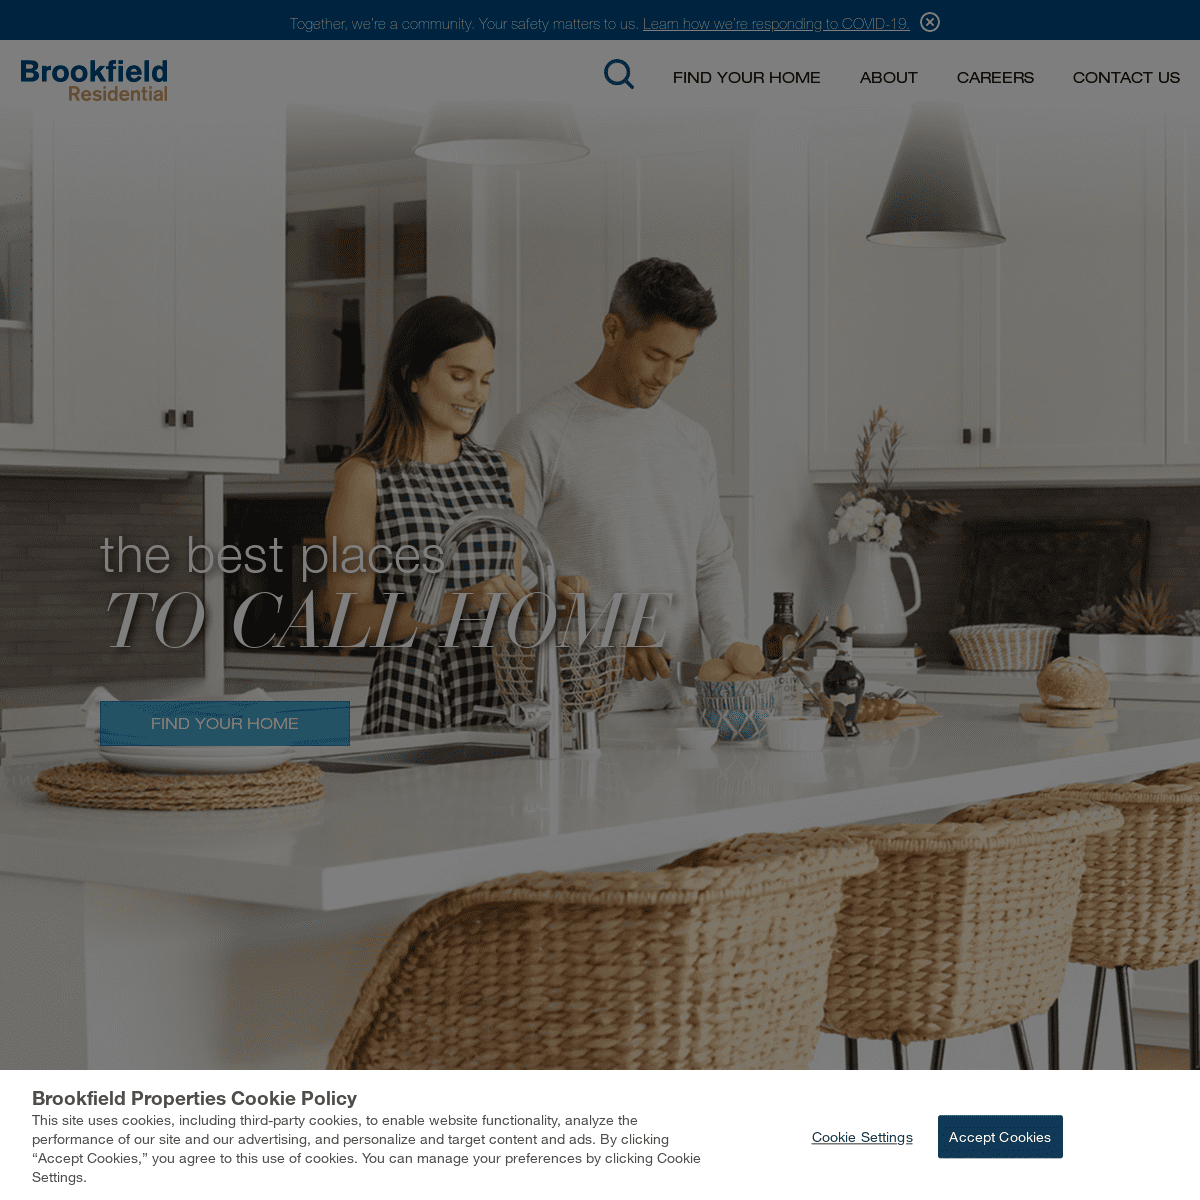 A complete backup of brookfieldrp.com